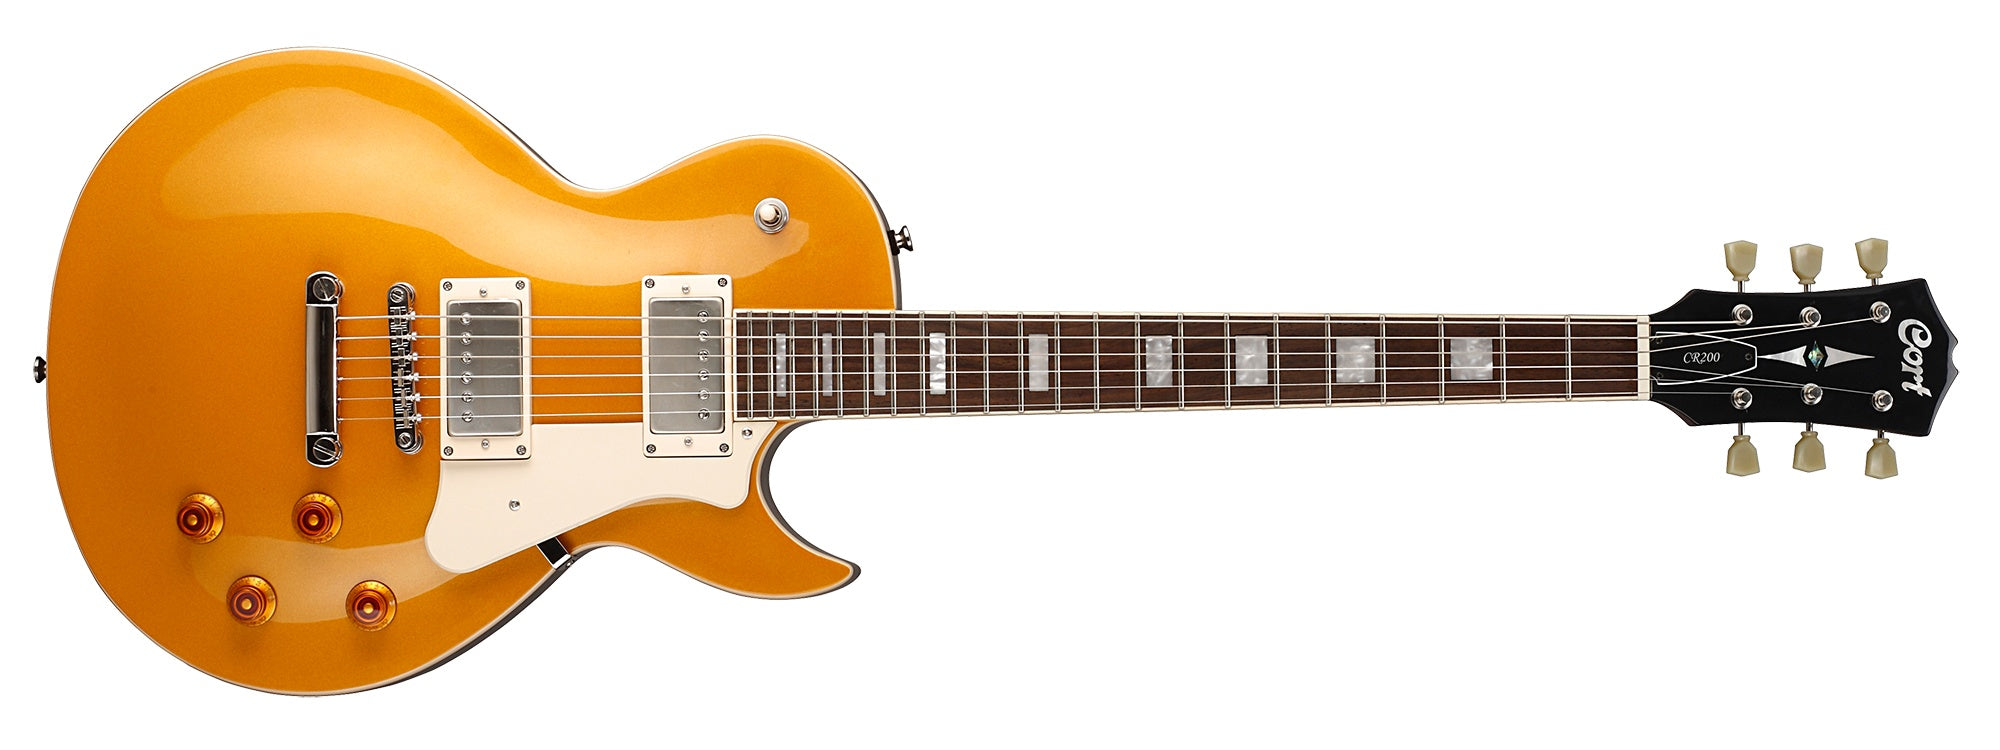 Cort CR200 Gold Top, Electric Guitar for sale at Richards Guitars.